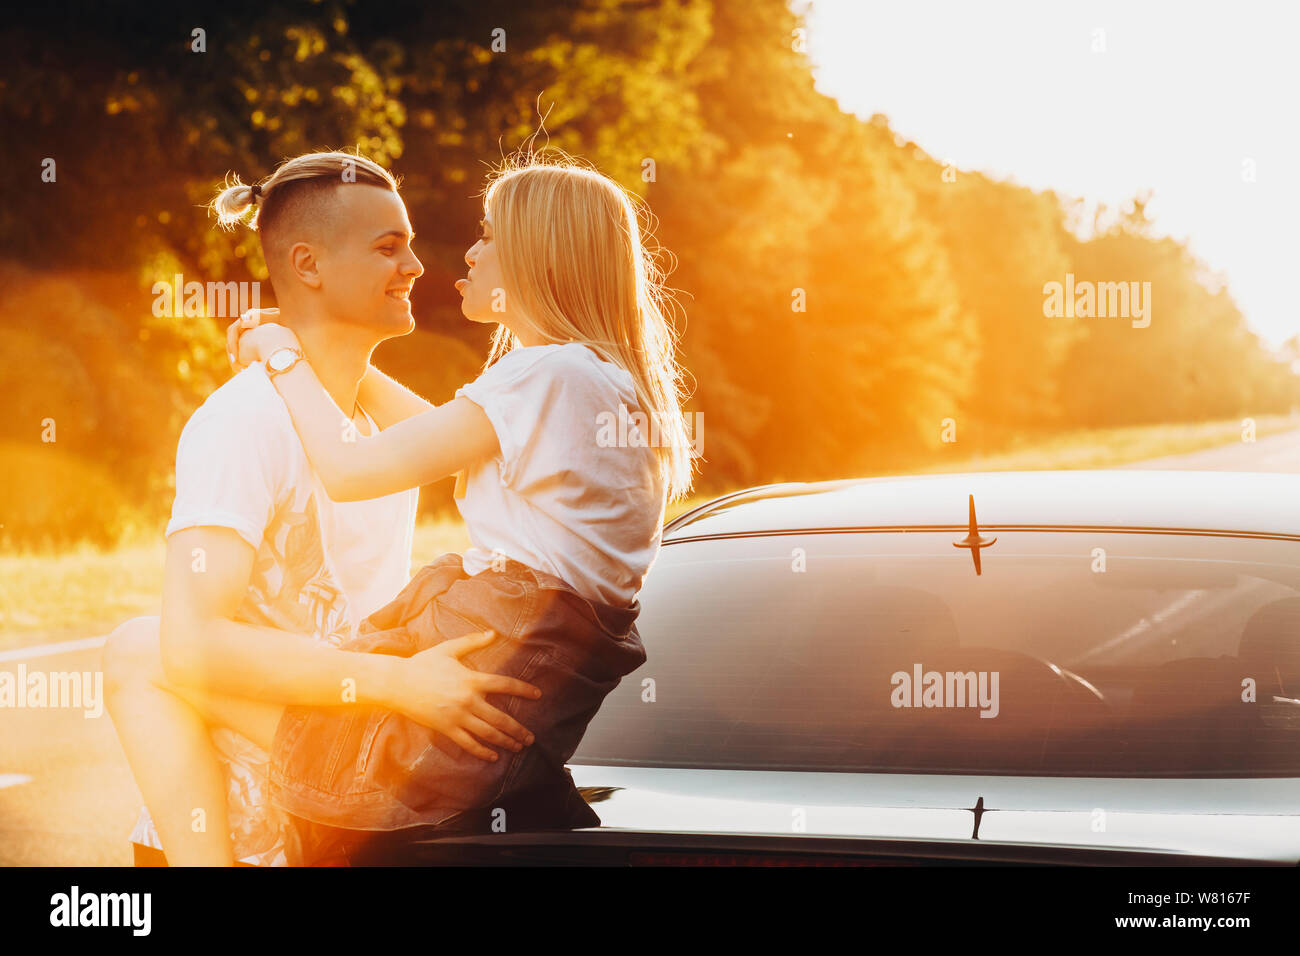 Beautiful young blonde woman having fun with her boyfriend while she is shoing the tongque while he is laughing.Girl sitting on the back of the car wh Stock Photo